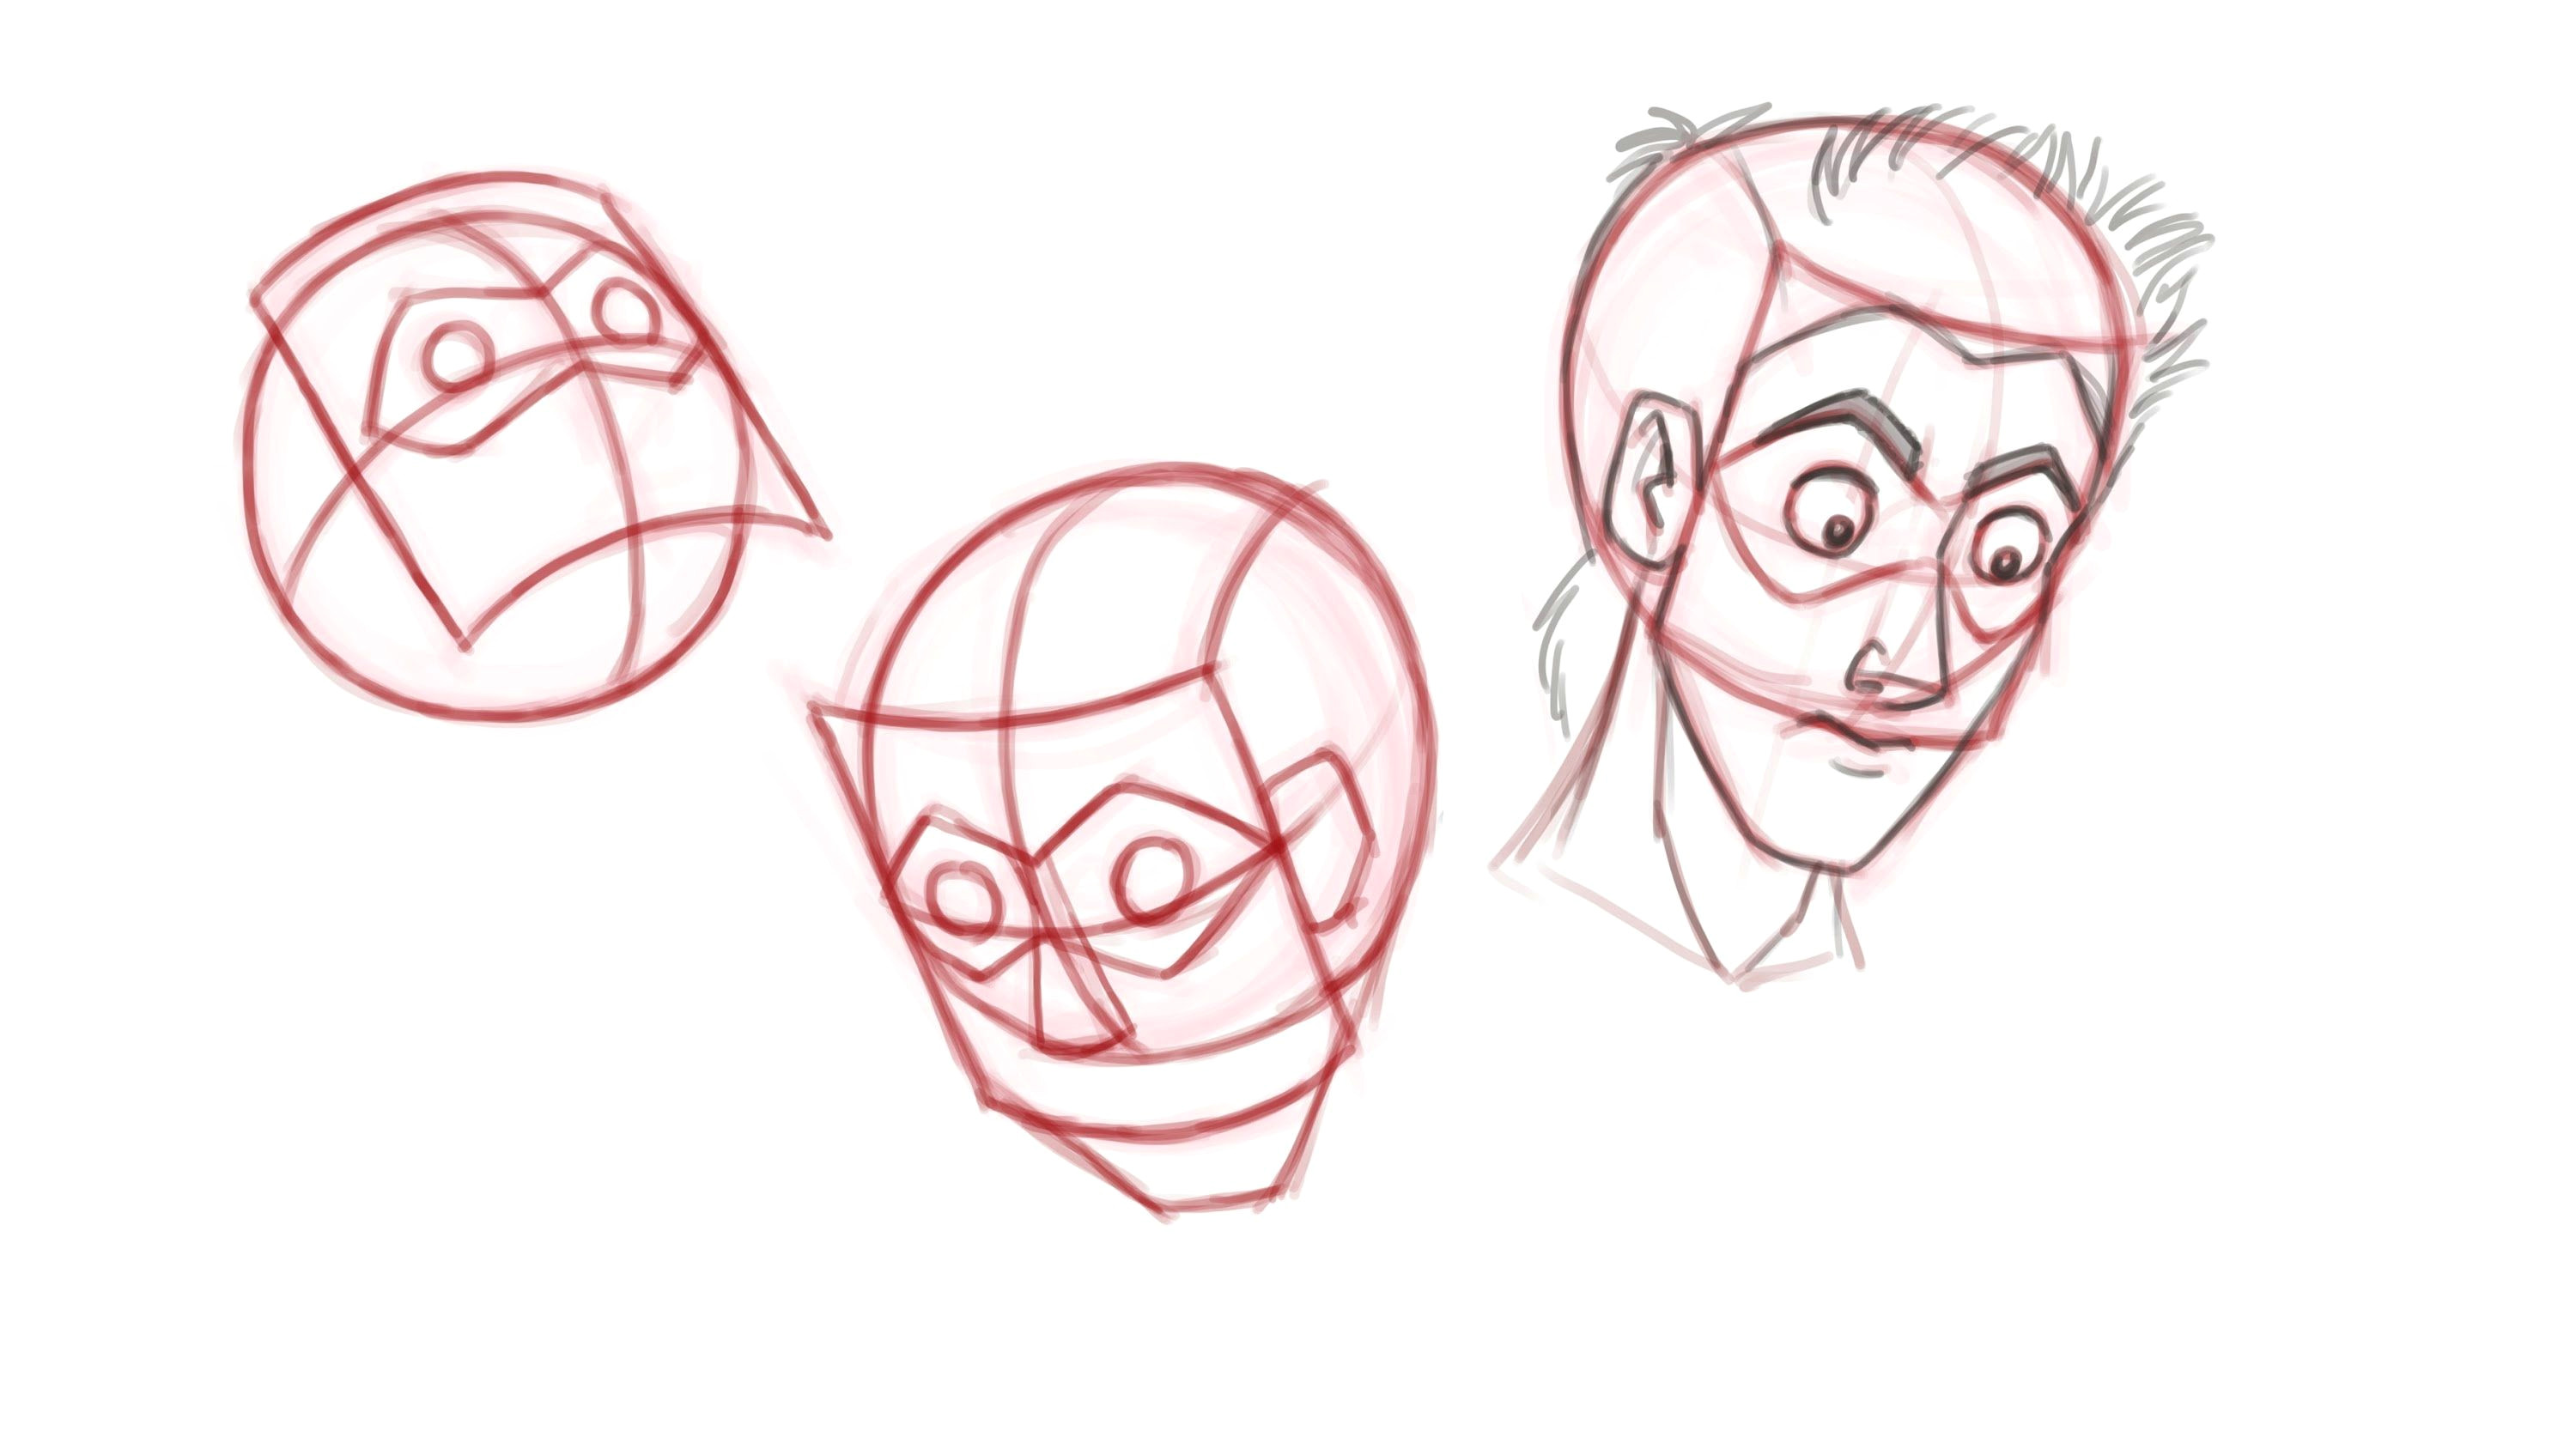 Drawing Simple Cartoons Drawn Animation Tutorial How to Animate Heads Drawing Faces From